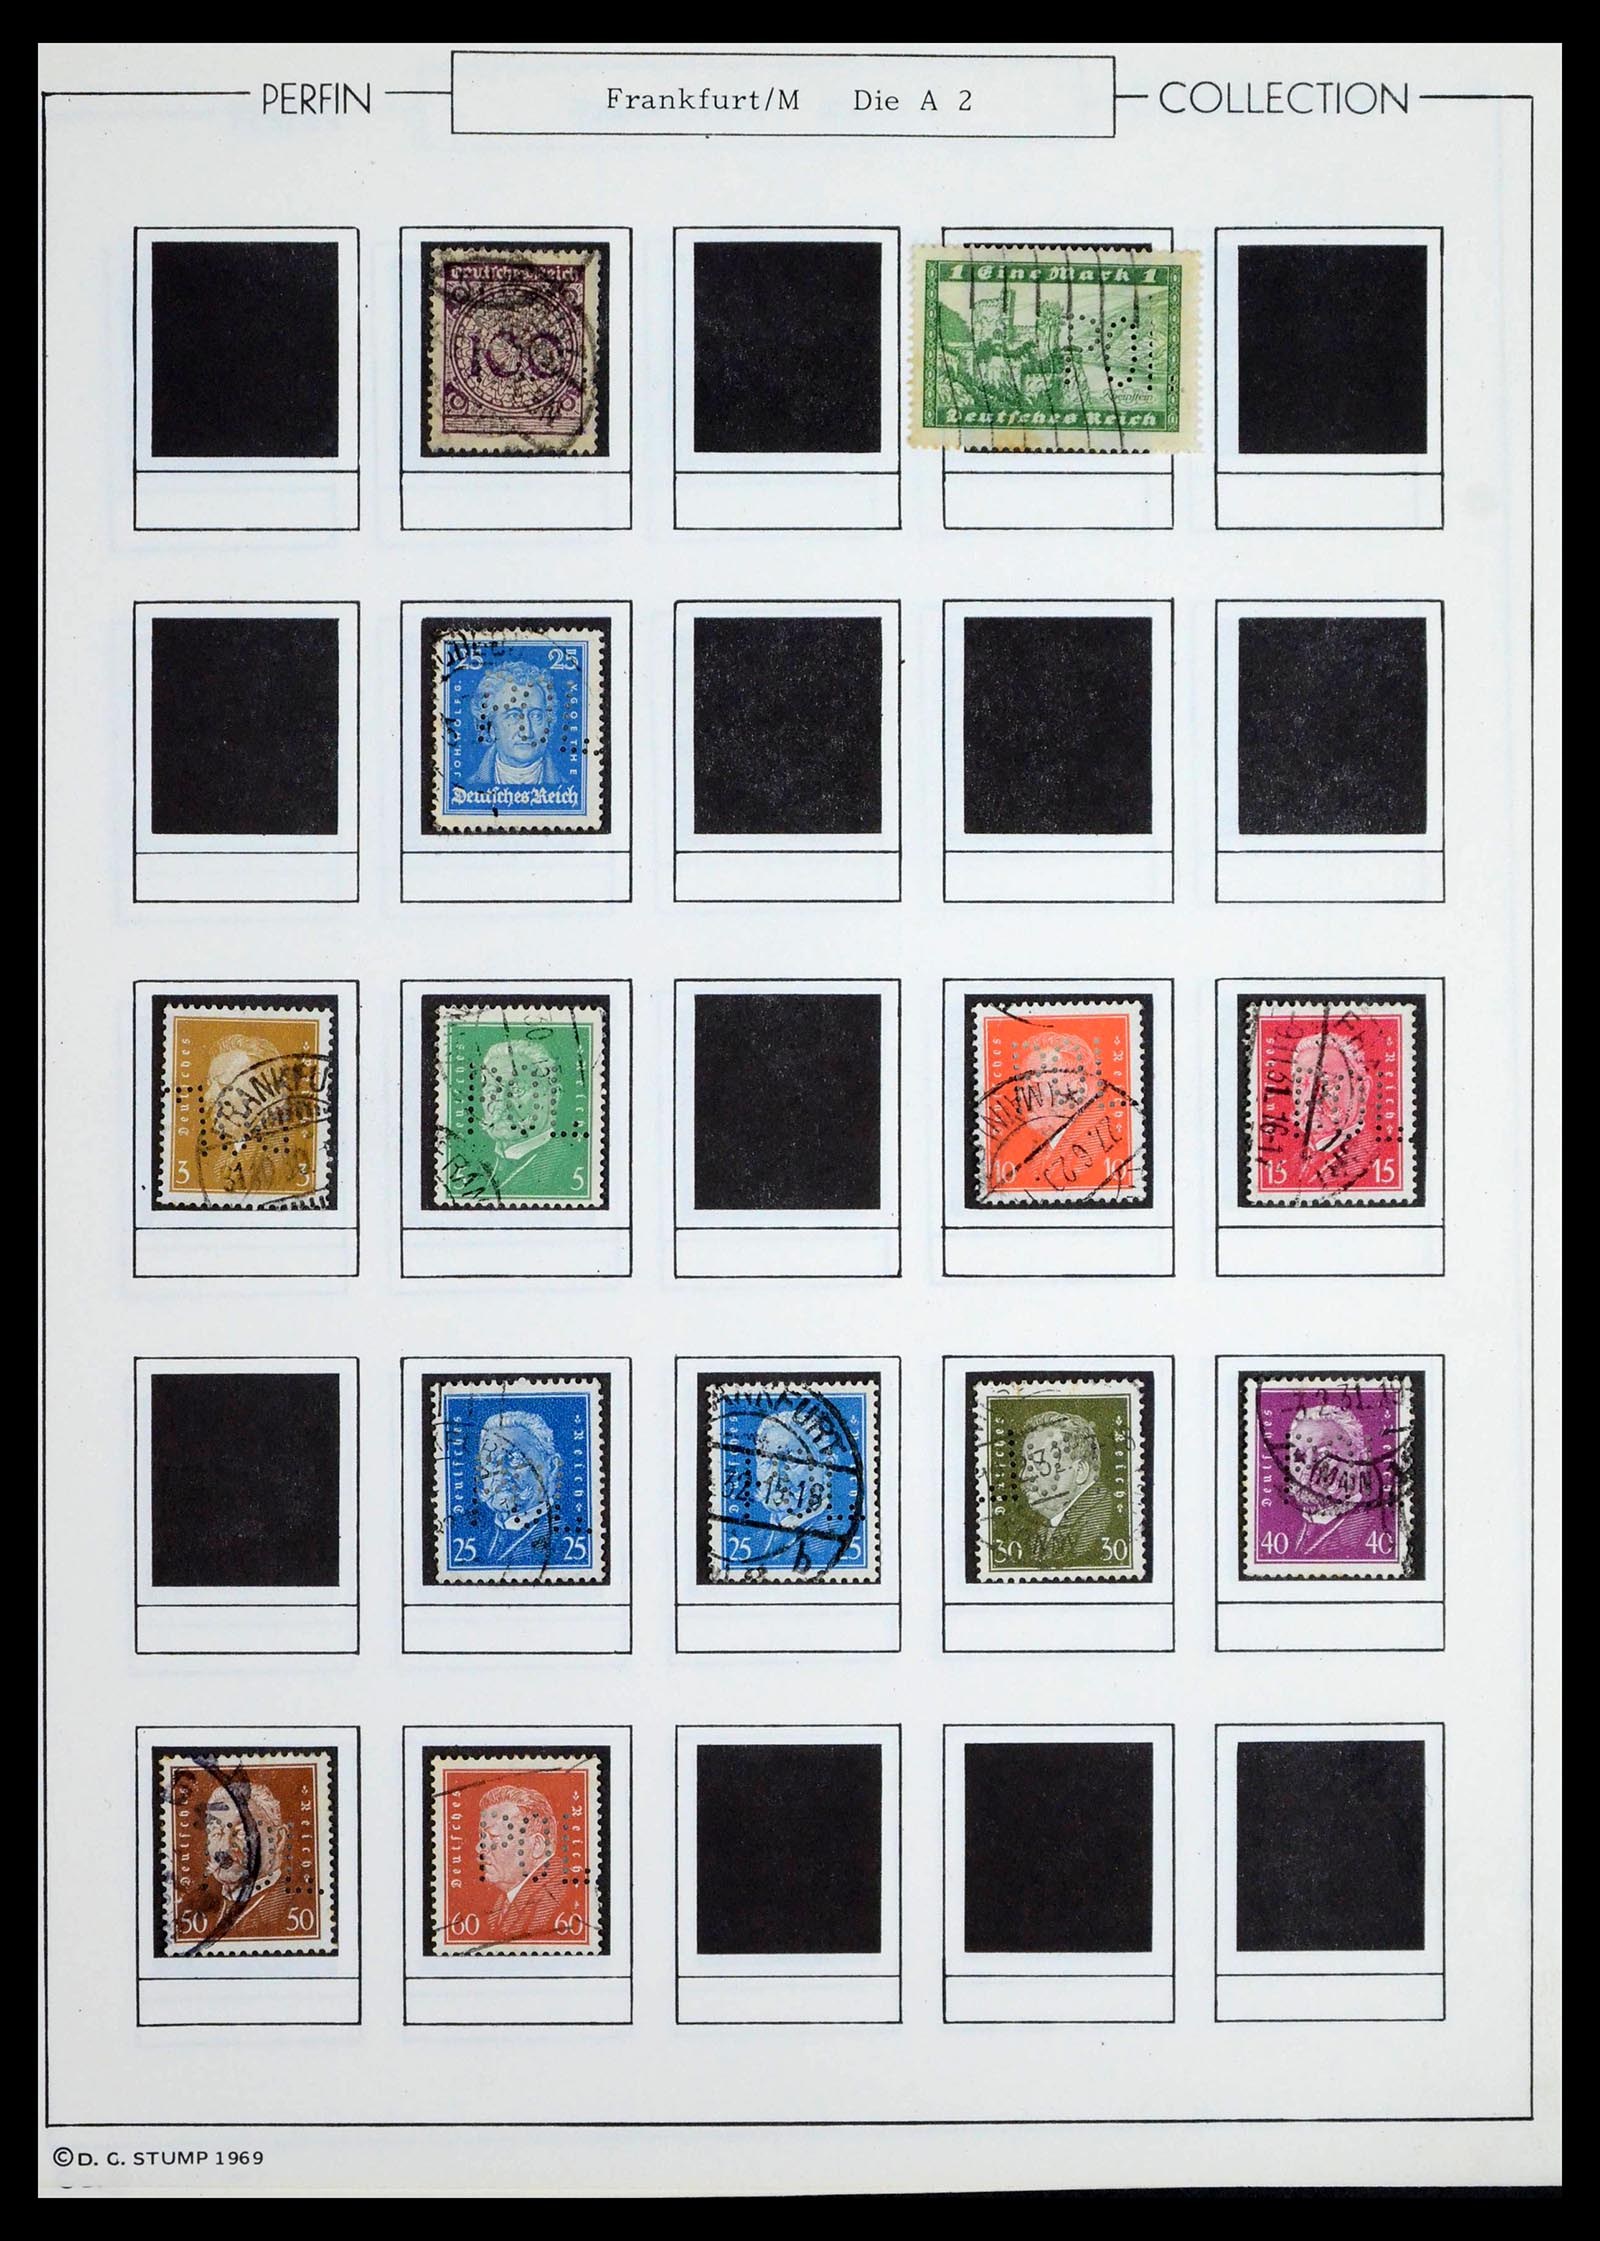 39458 0027 - Stamp collection 39458 Germany POL lochungen 1926-1955.